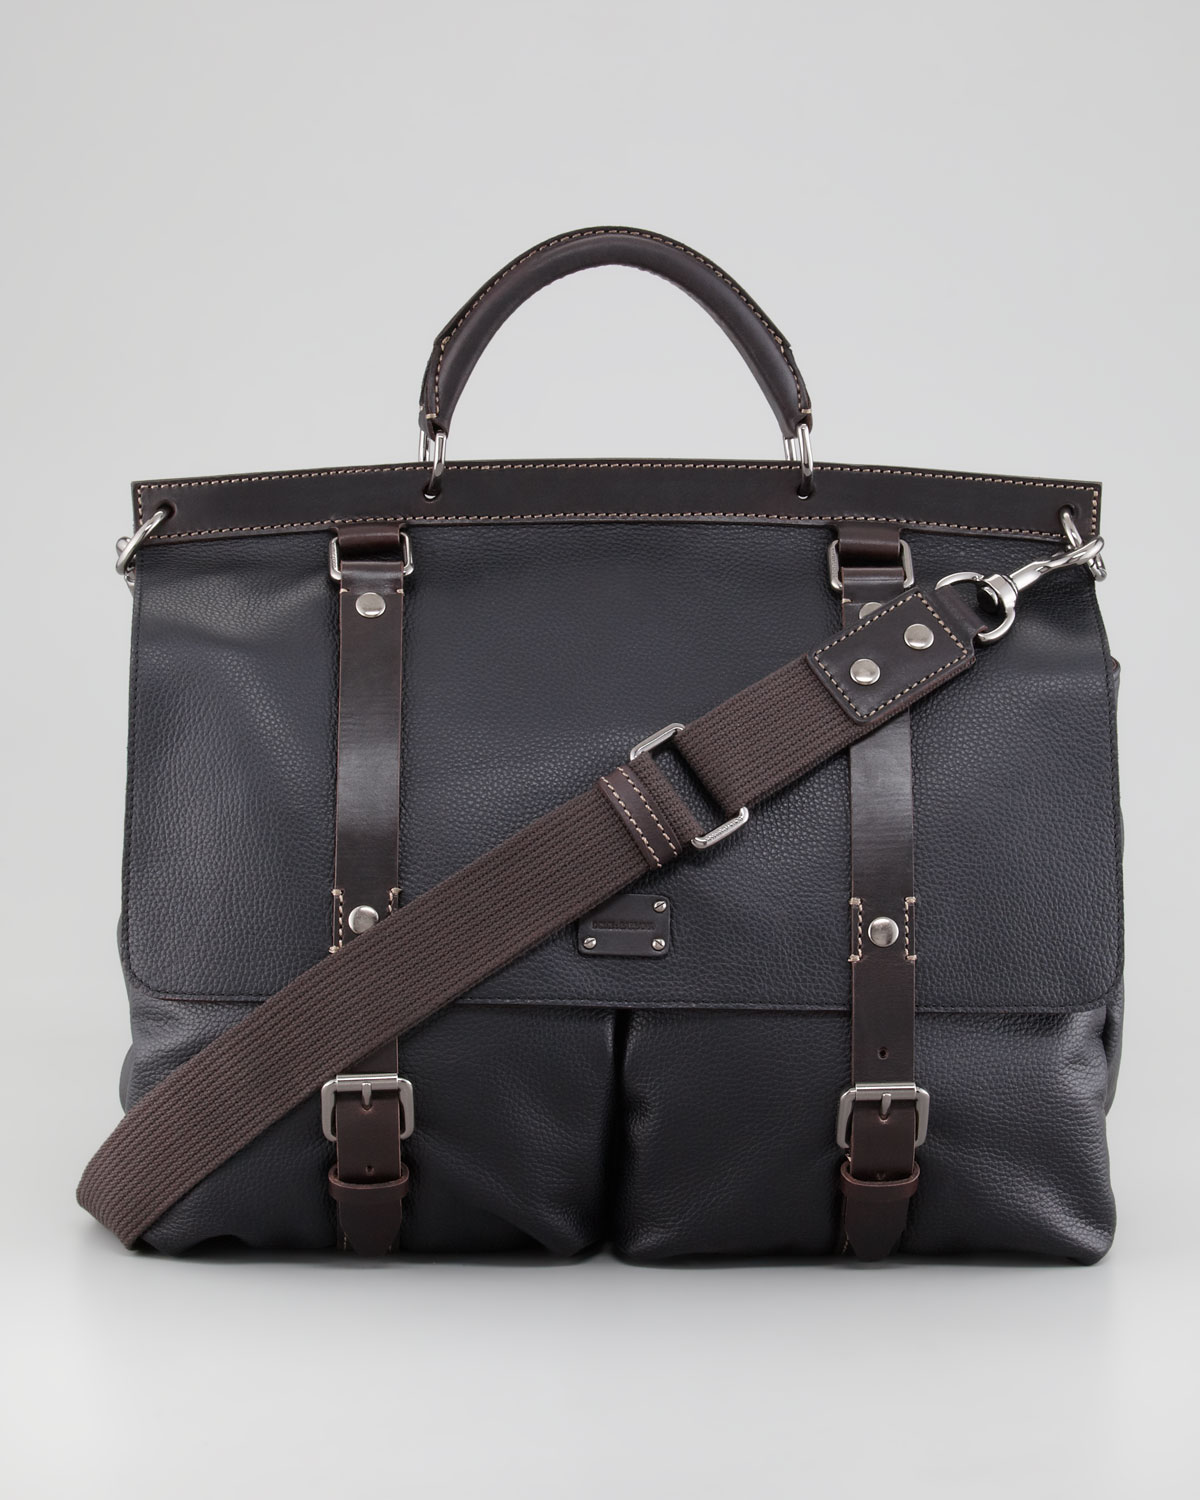 Lyst - Dolce & Gabbana Pebbled Leather Briefcase in Brown for Men